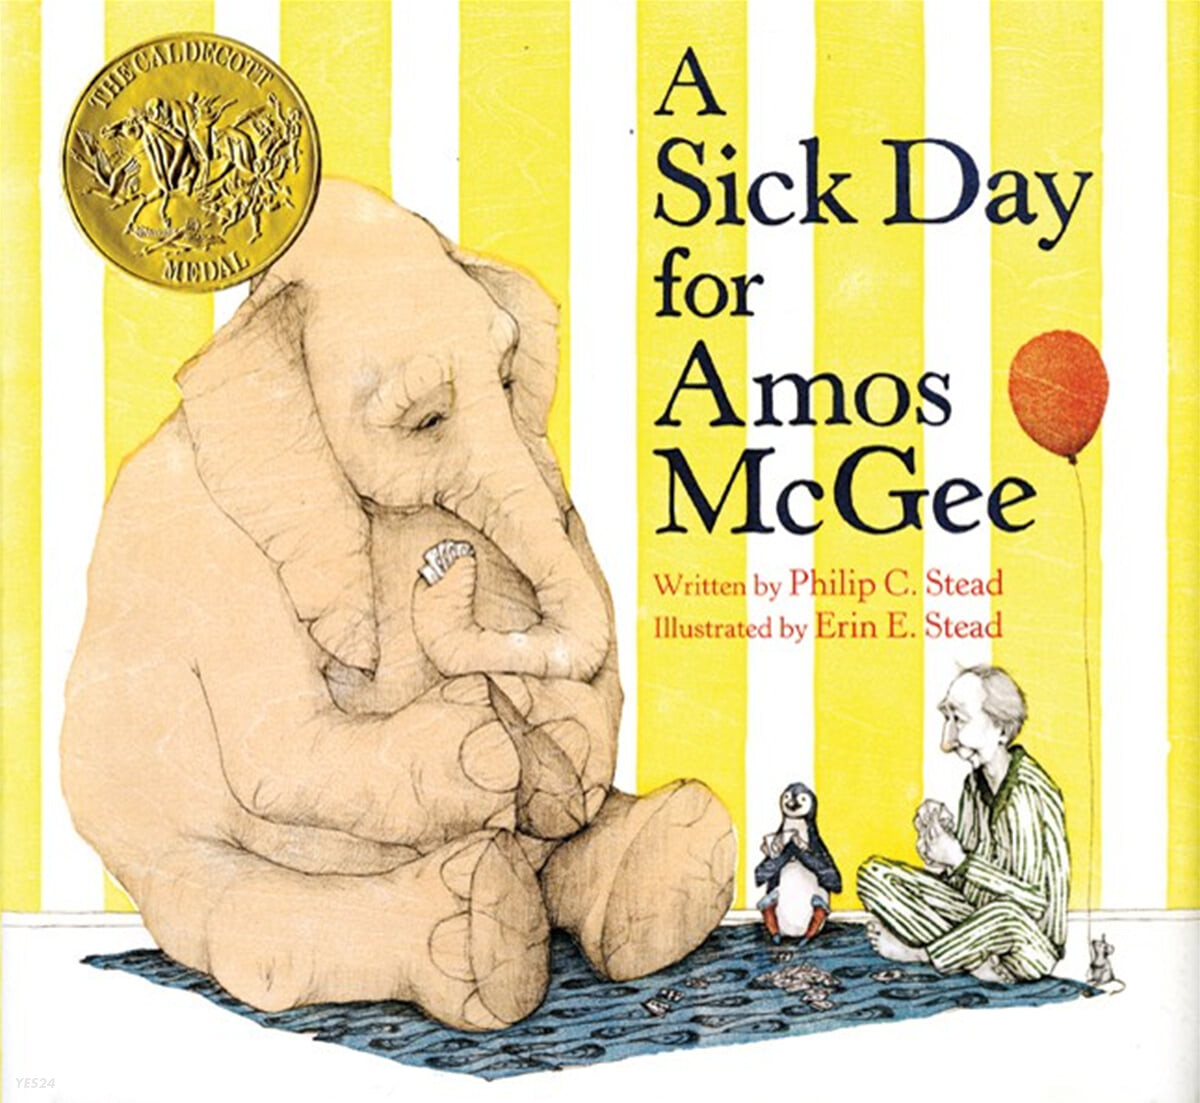 (A)sick day for amos mcgee